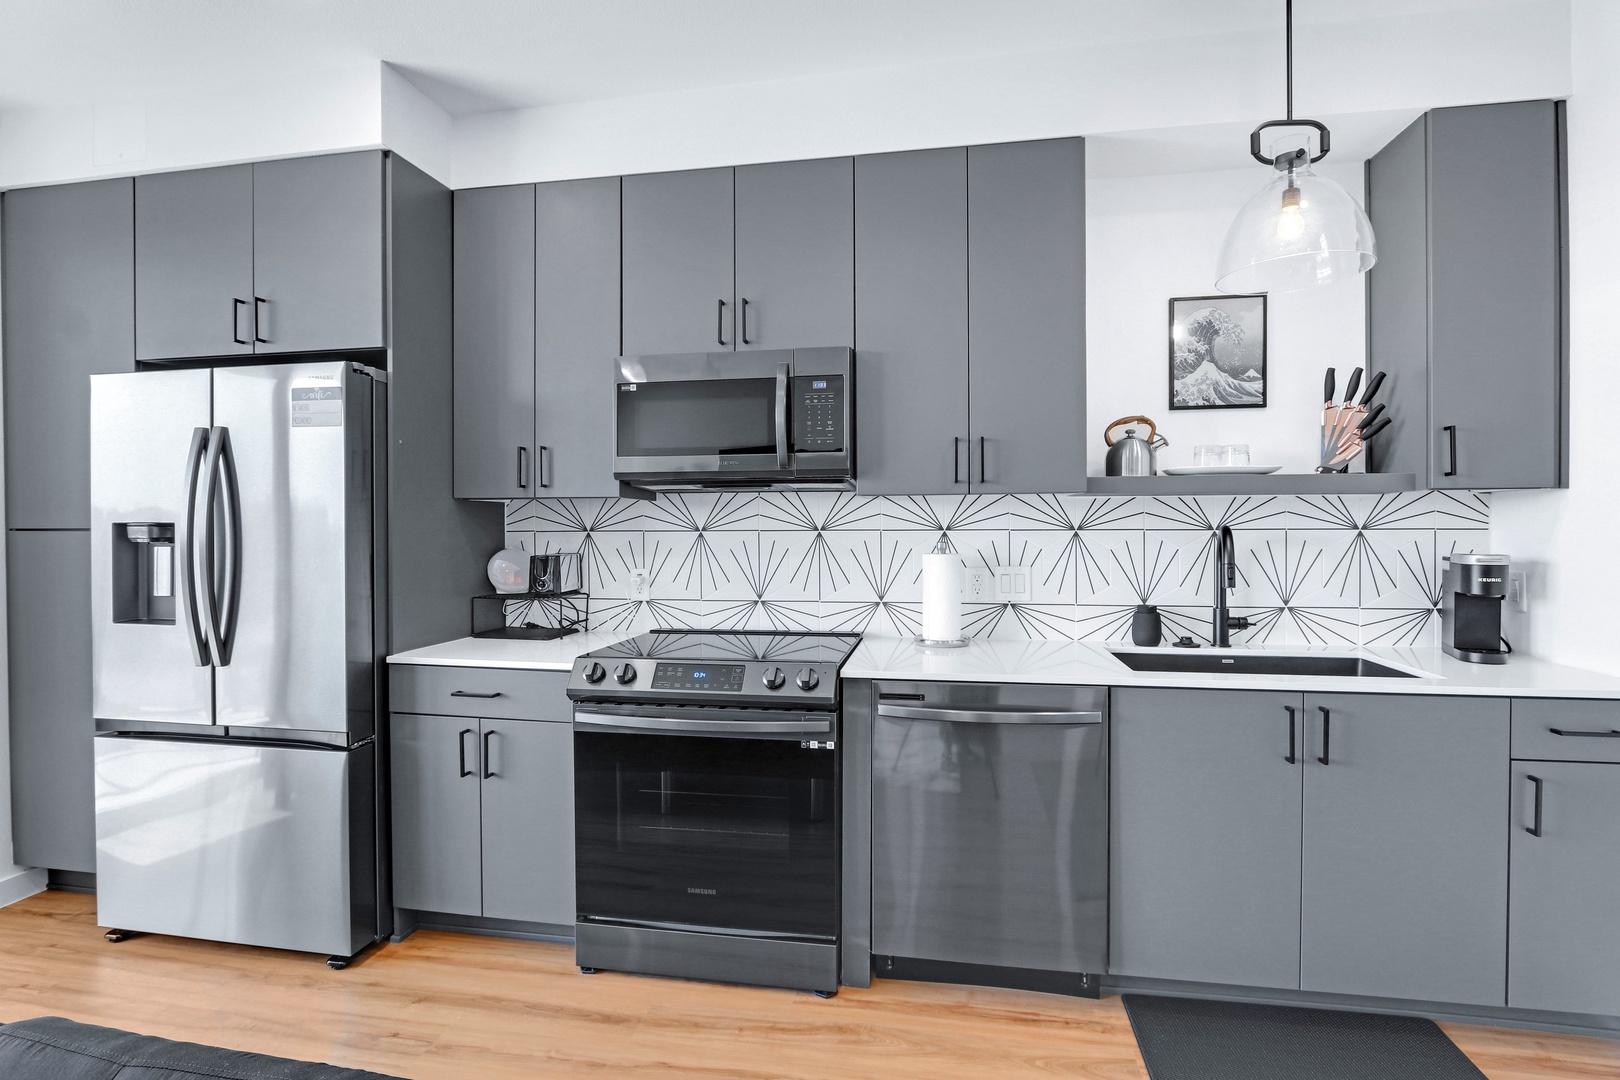 The sleek, updated kitchen offers ample space & every home comfort